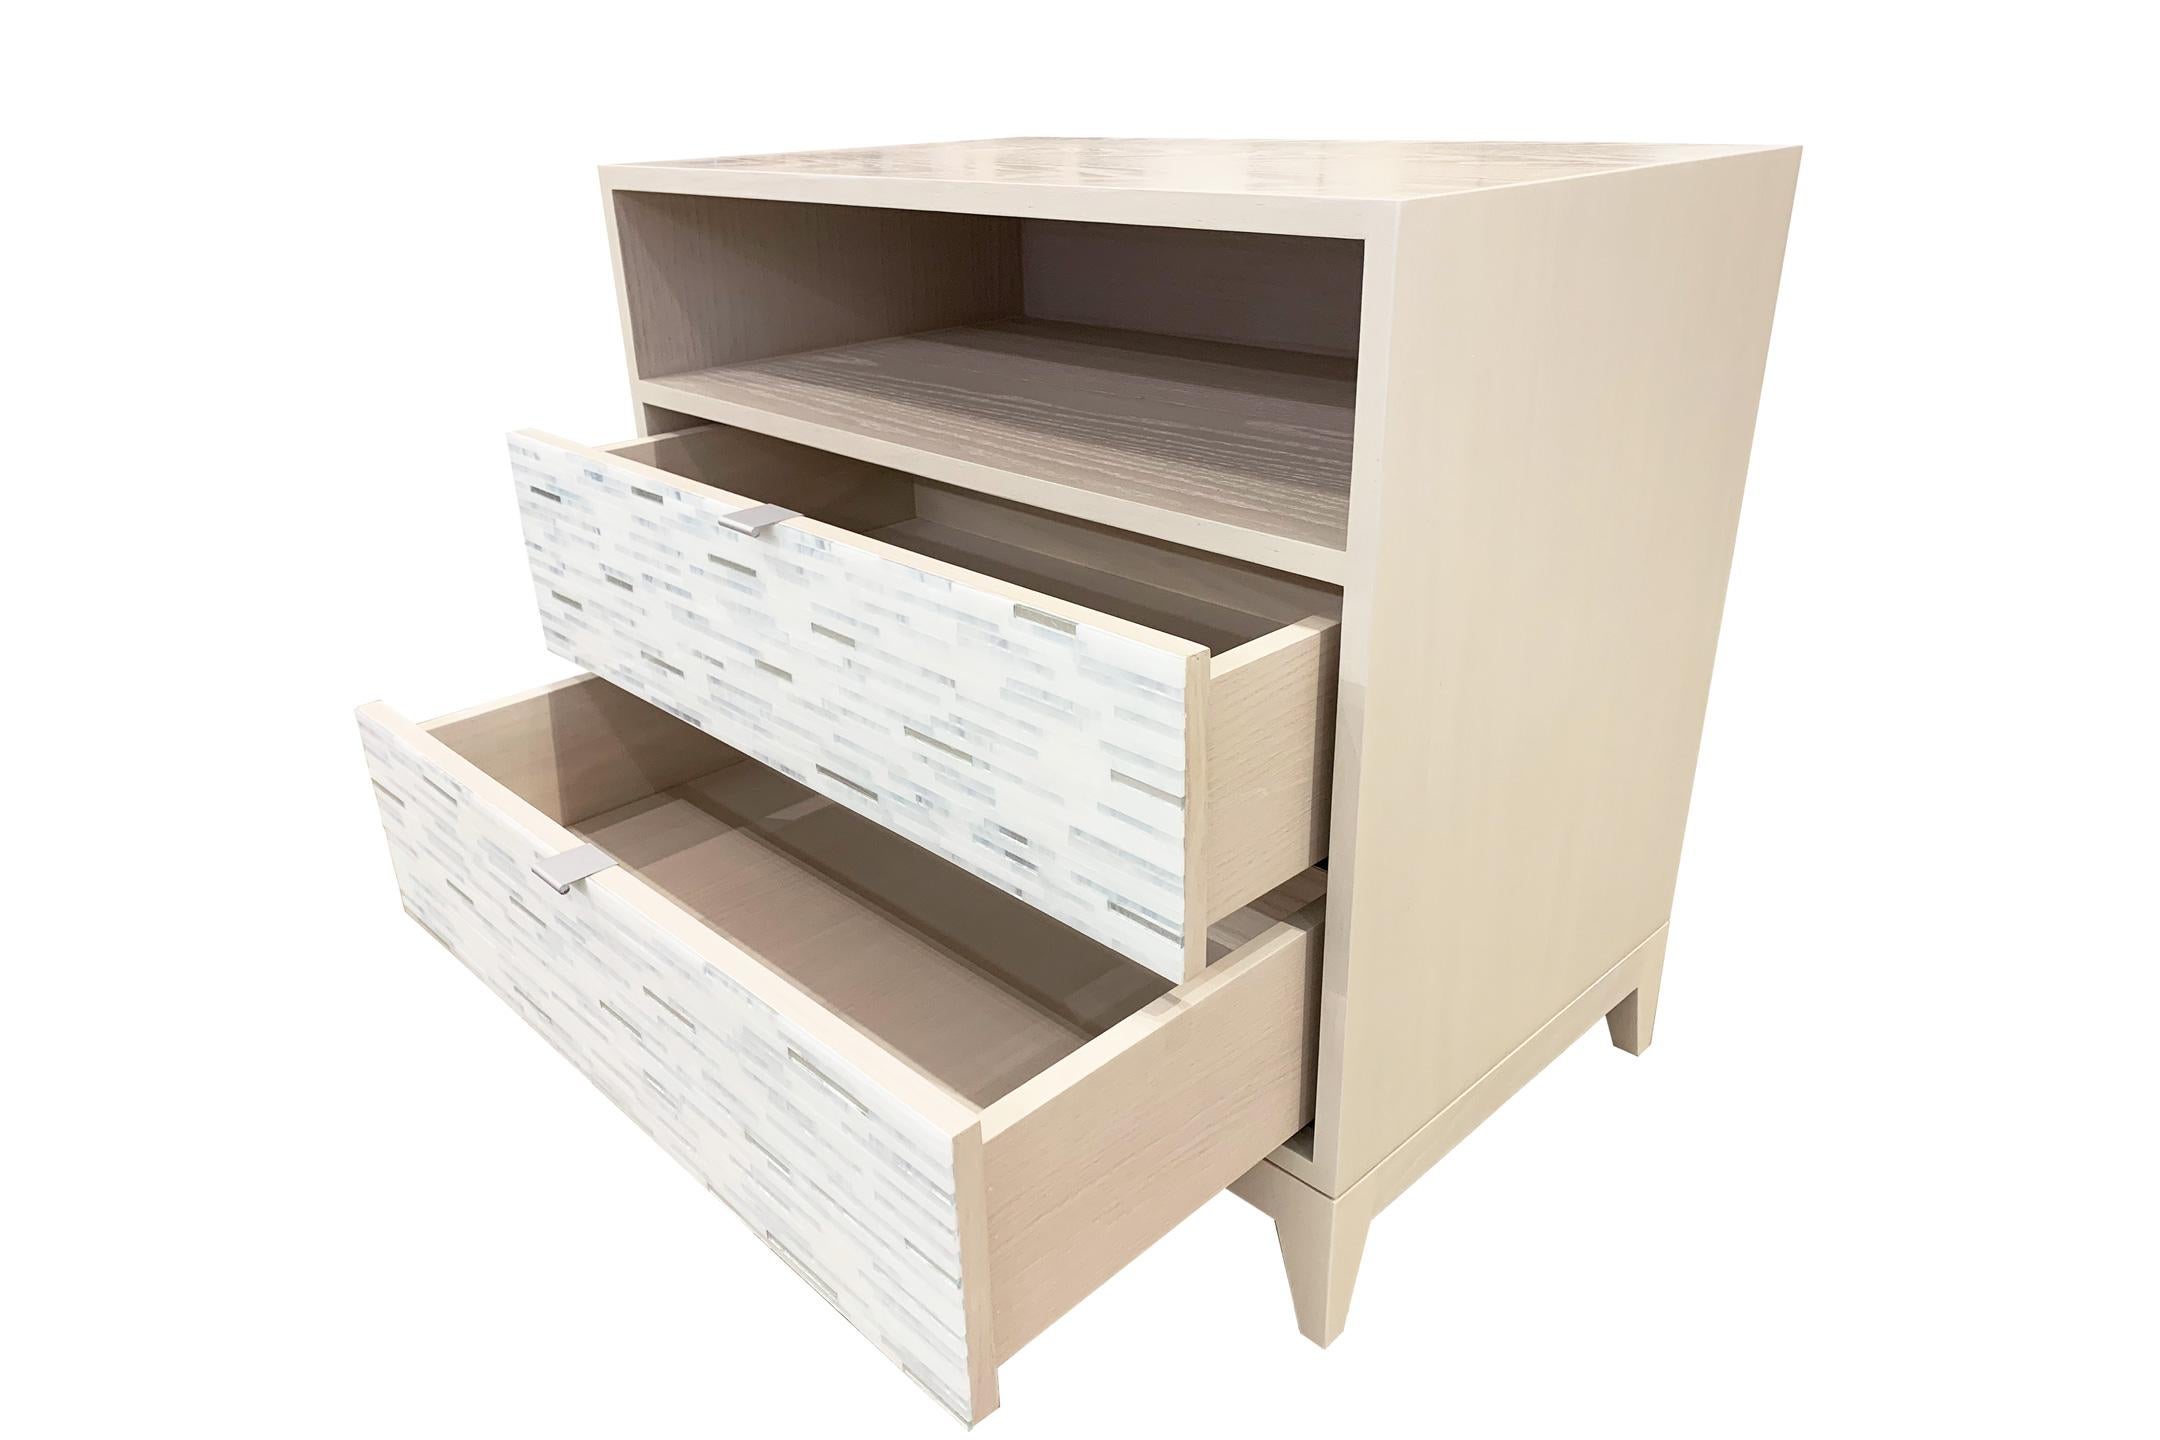 The Milano nightstand by Ercole Home has a 2-drawer front and open shelf, with washed ivory wood finish on oak. Handcut glass mosaics in icy white, wispy white, and silver decorate the surface in a horizontal regular stripe pattern. There are two